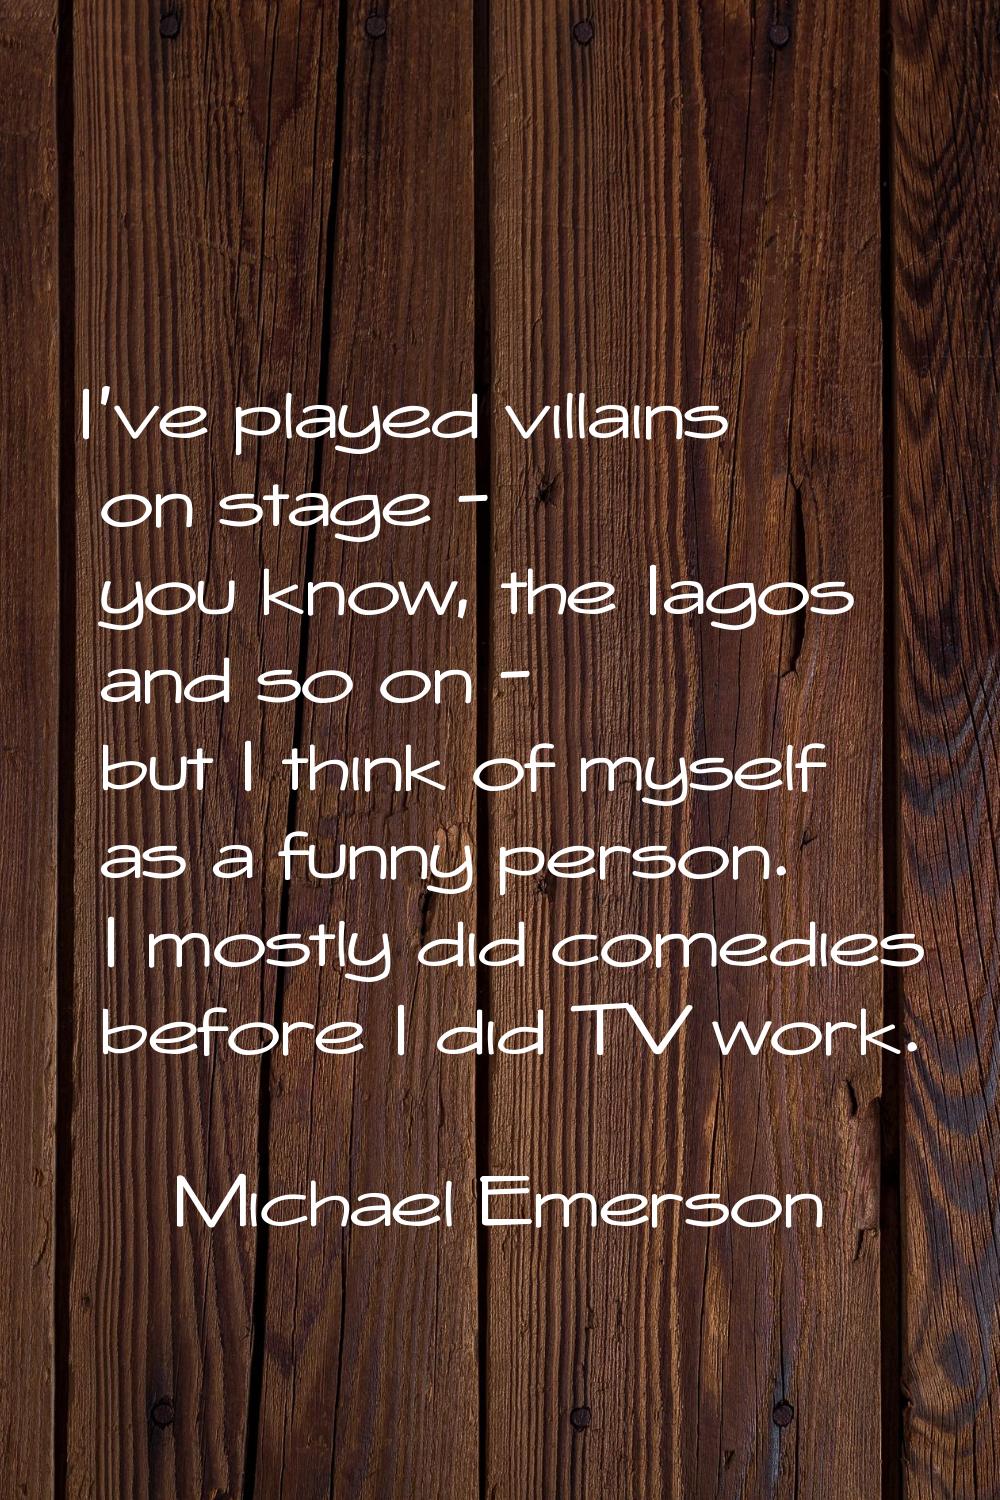 I've played villains on stage - you know, the Iagos and so on - but I think of myself as a funny pe